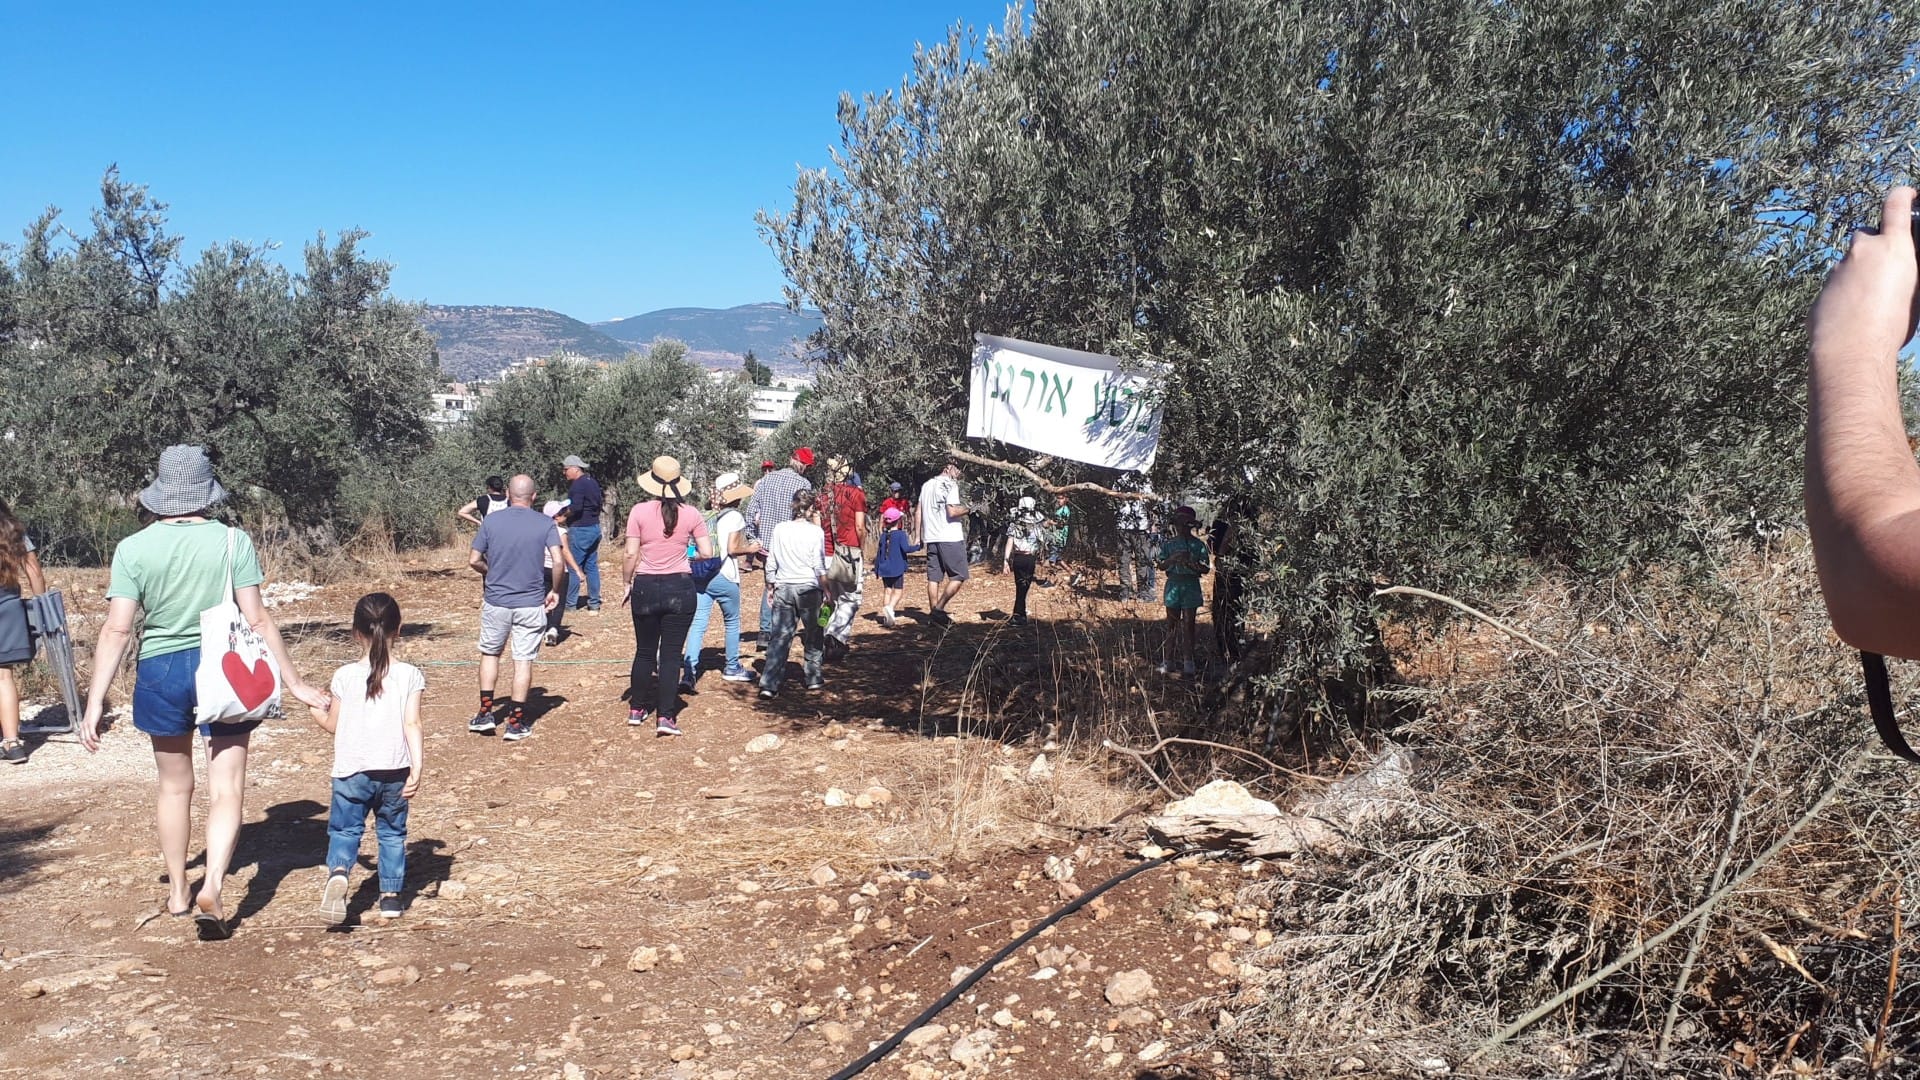 africa-middle-east-profiles-bringing-palestinians-and-israelis-together-through-olive-oil-production-olive-oil-times